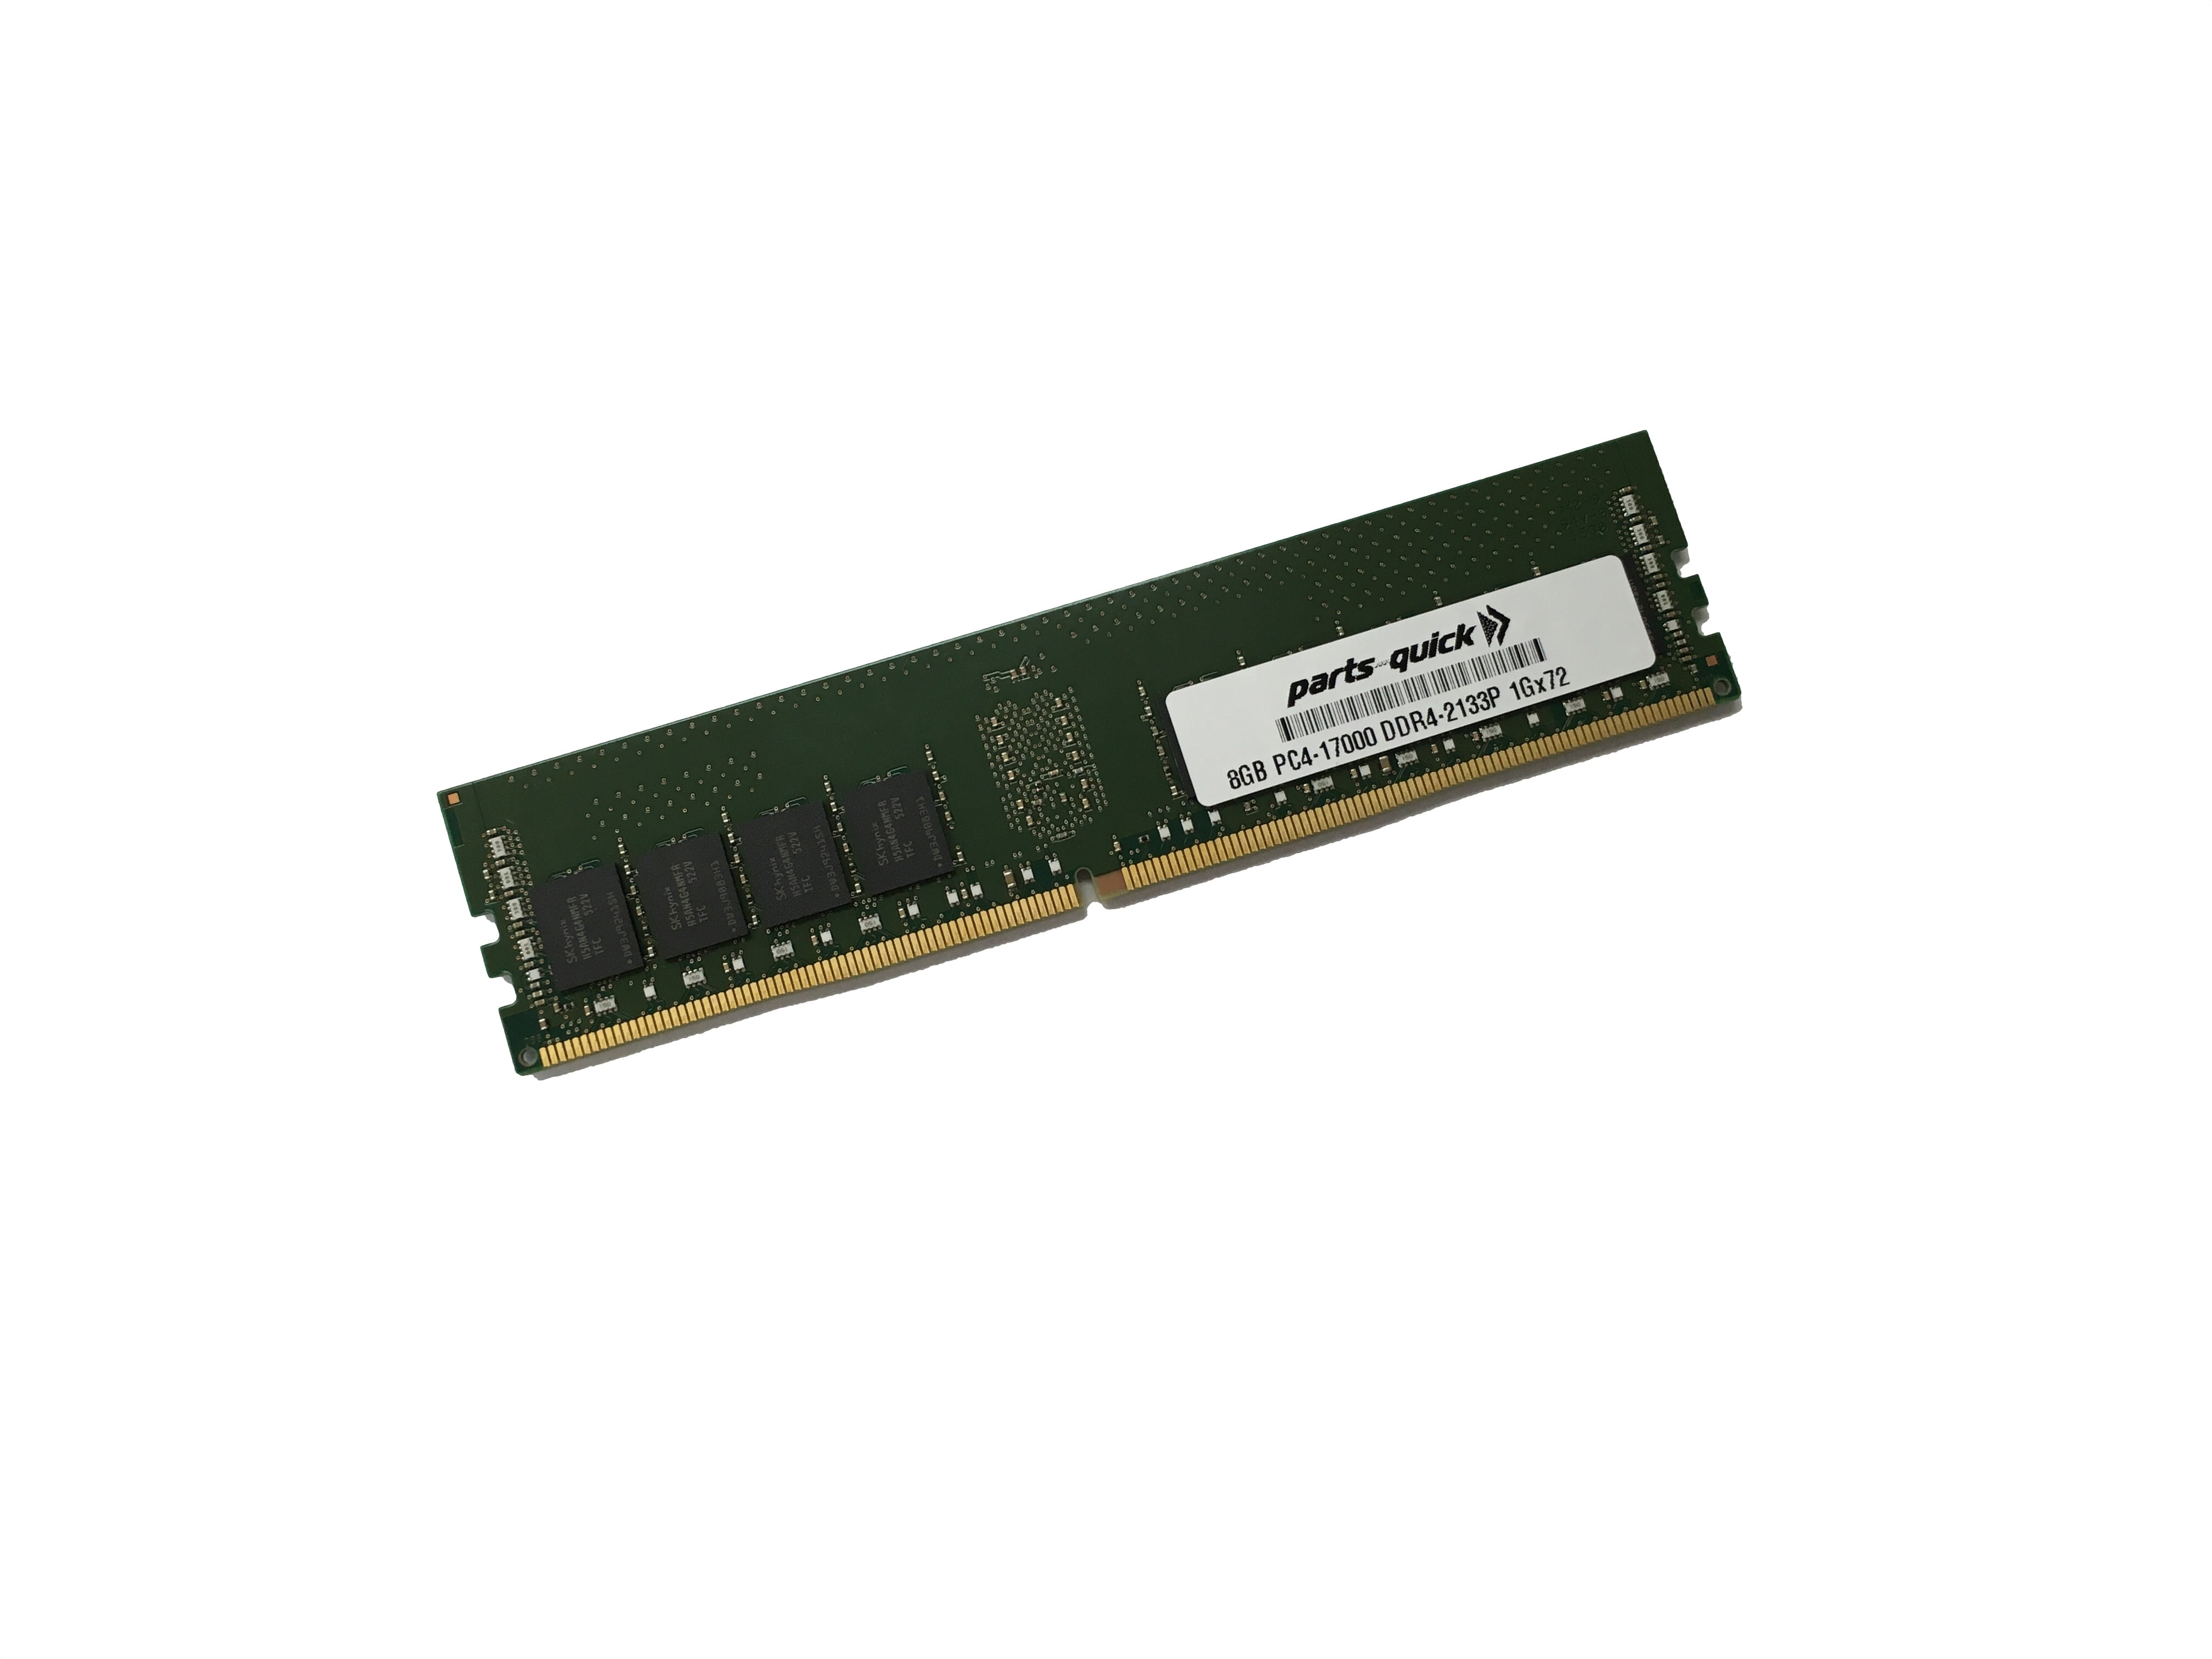 DDR4 2133MHz SODIMM RAM parts-quick 16GB Memory for Dell Inspiron 15 5567 